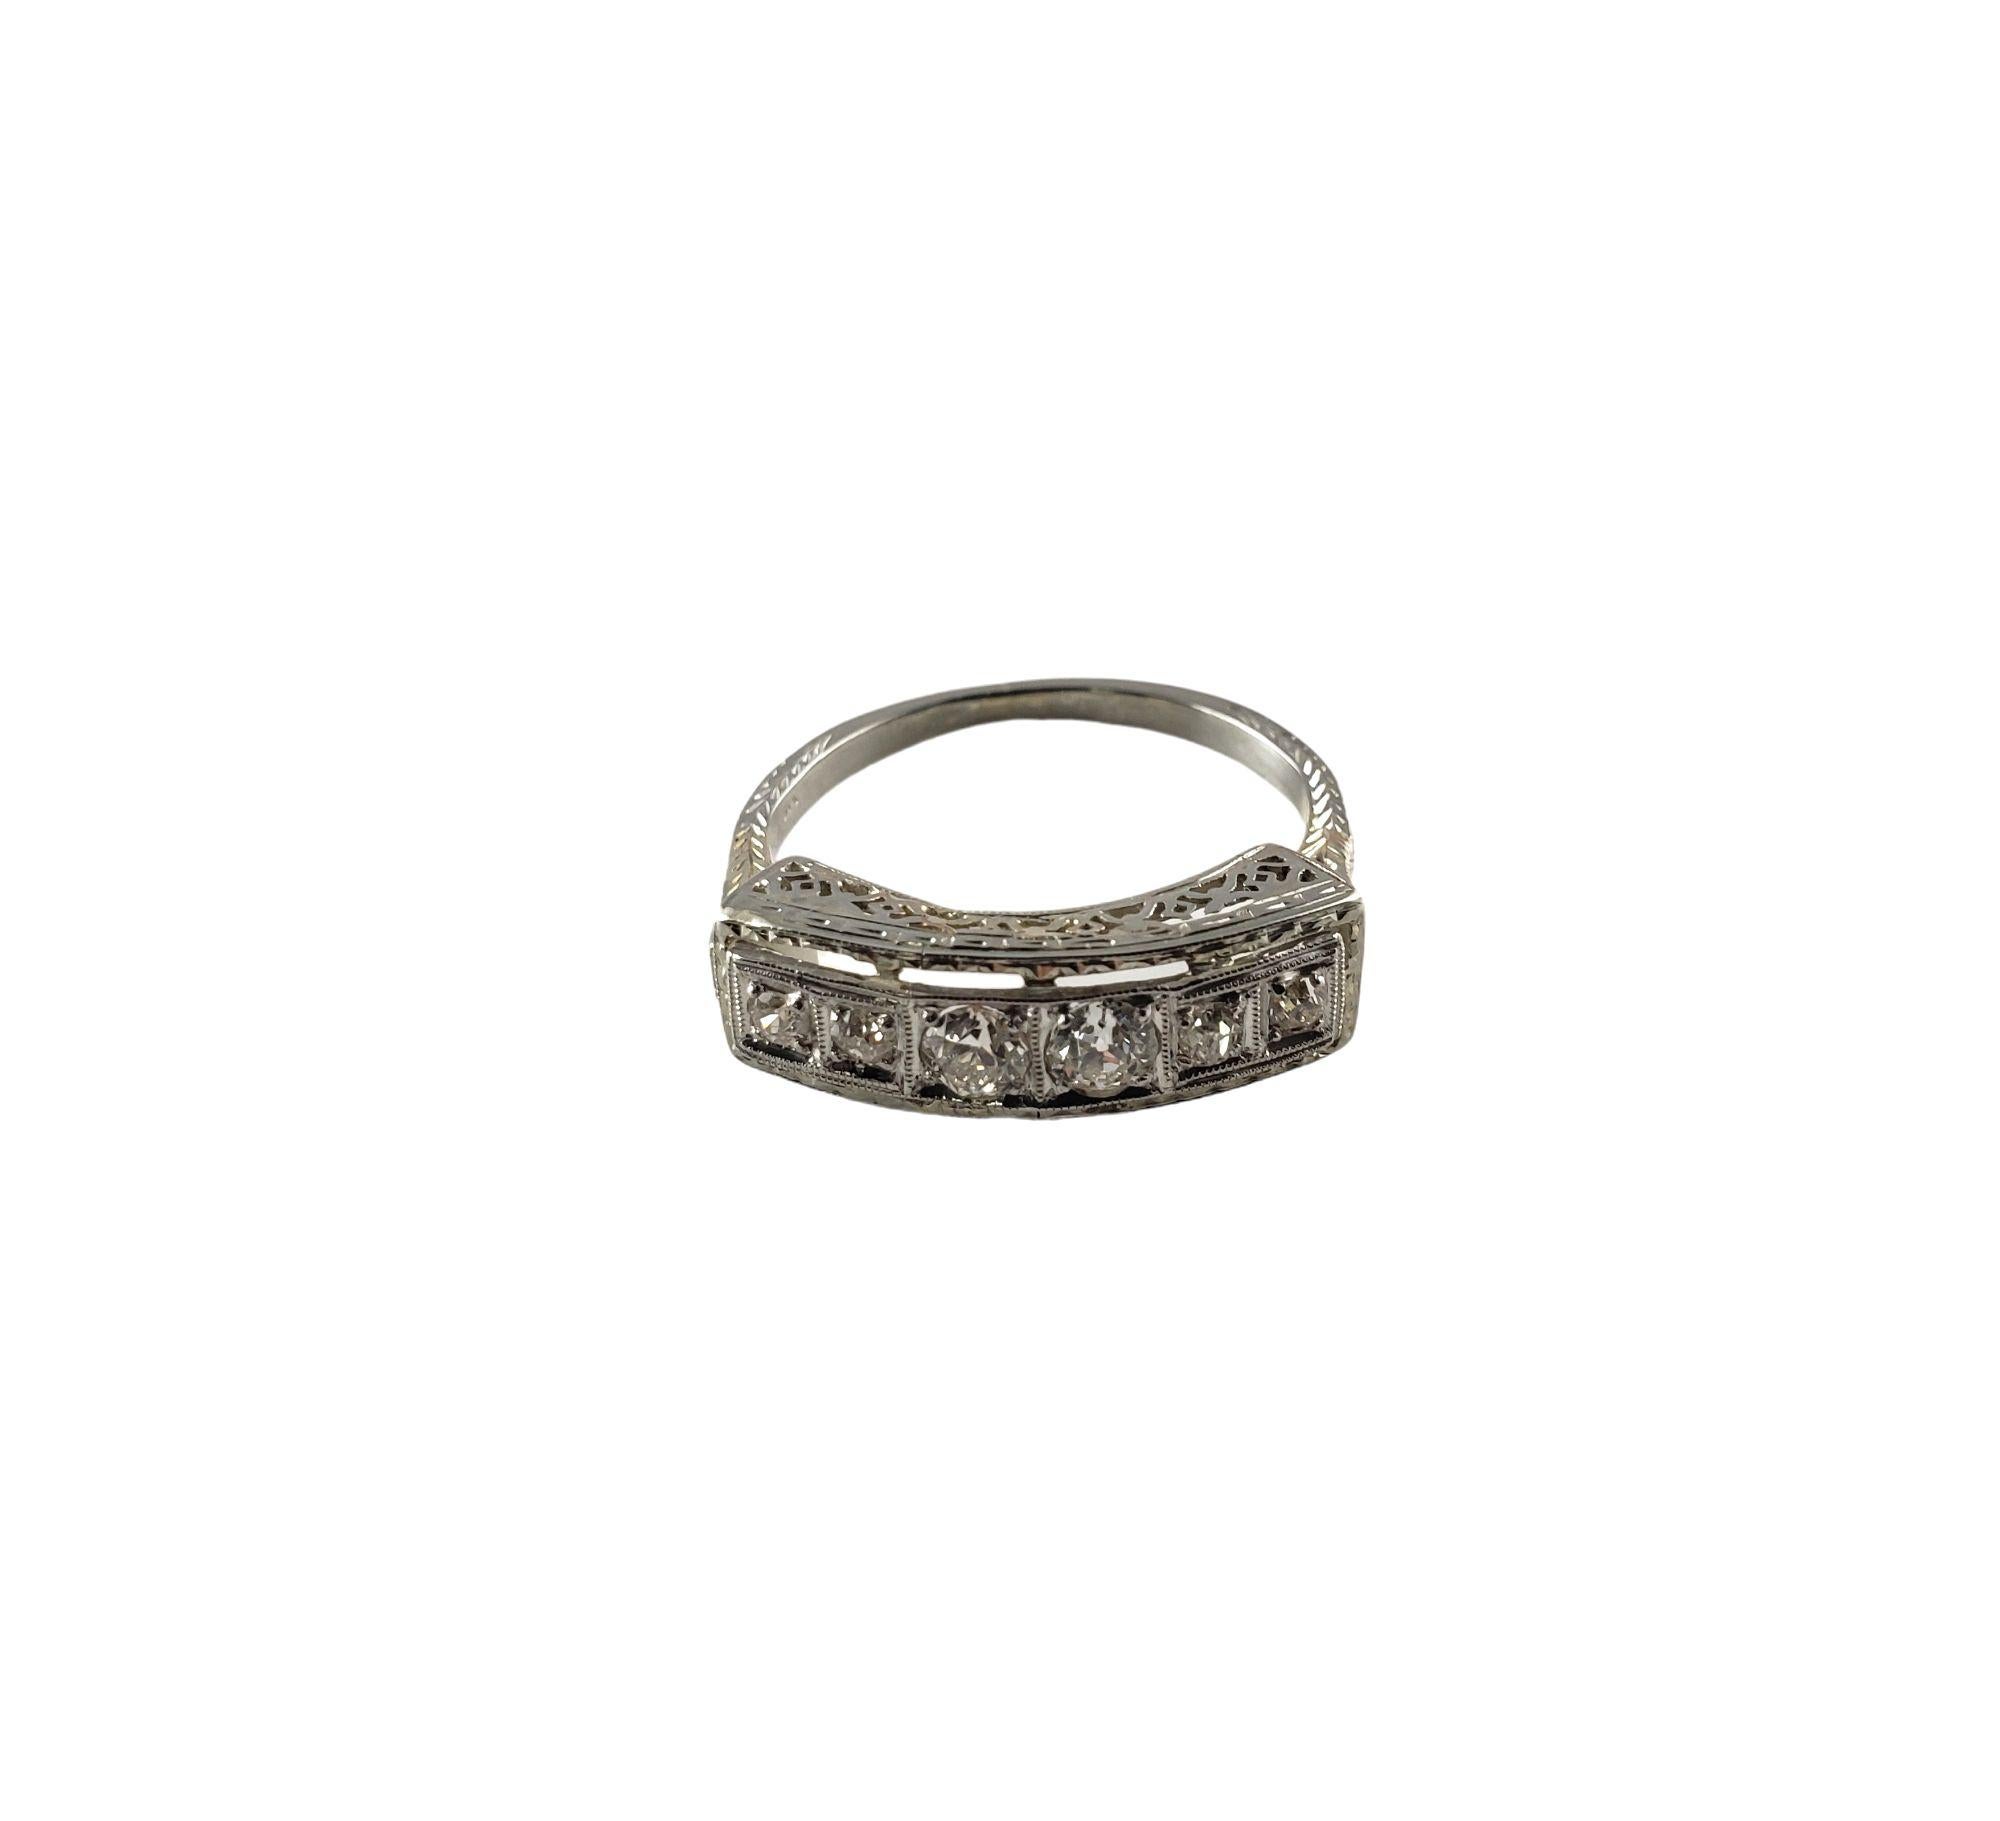 Vintage 10 Karat White Gold Filigree and Diamond Ring Size 6.25-

This sparkling ring features six round old mine cut diamonds* set in beautifully detailed 10K white gold. Width: 6 mm.
Shank: 1.5 mm.
*One stone has chip to table not visible to naked